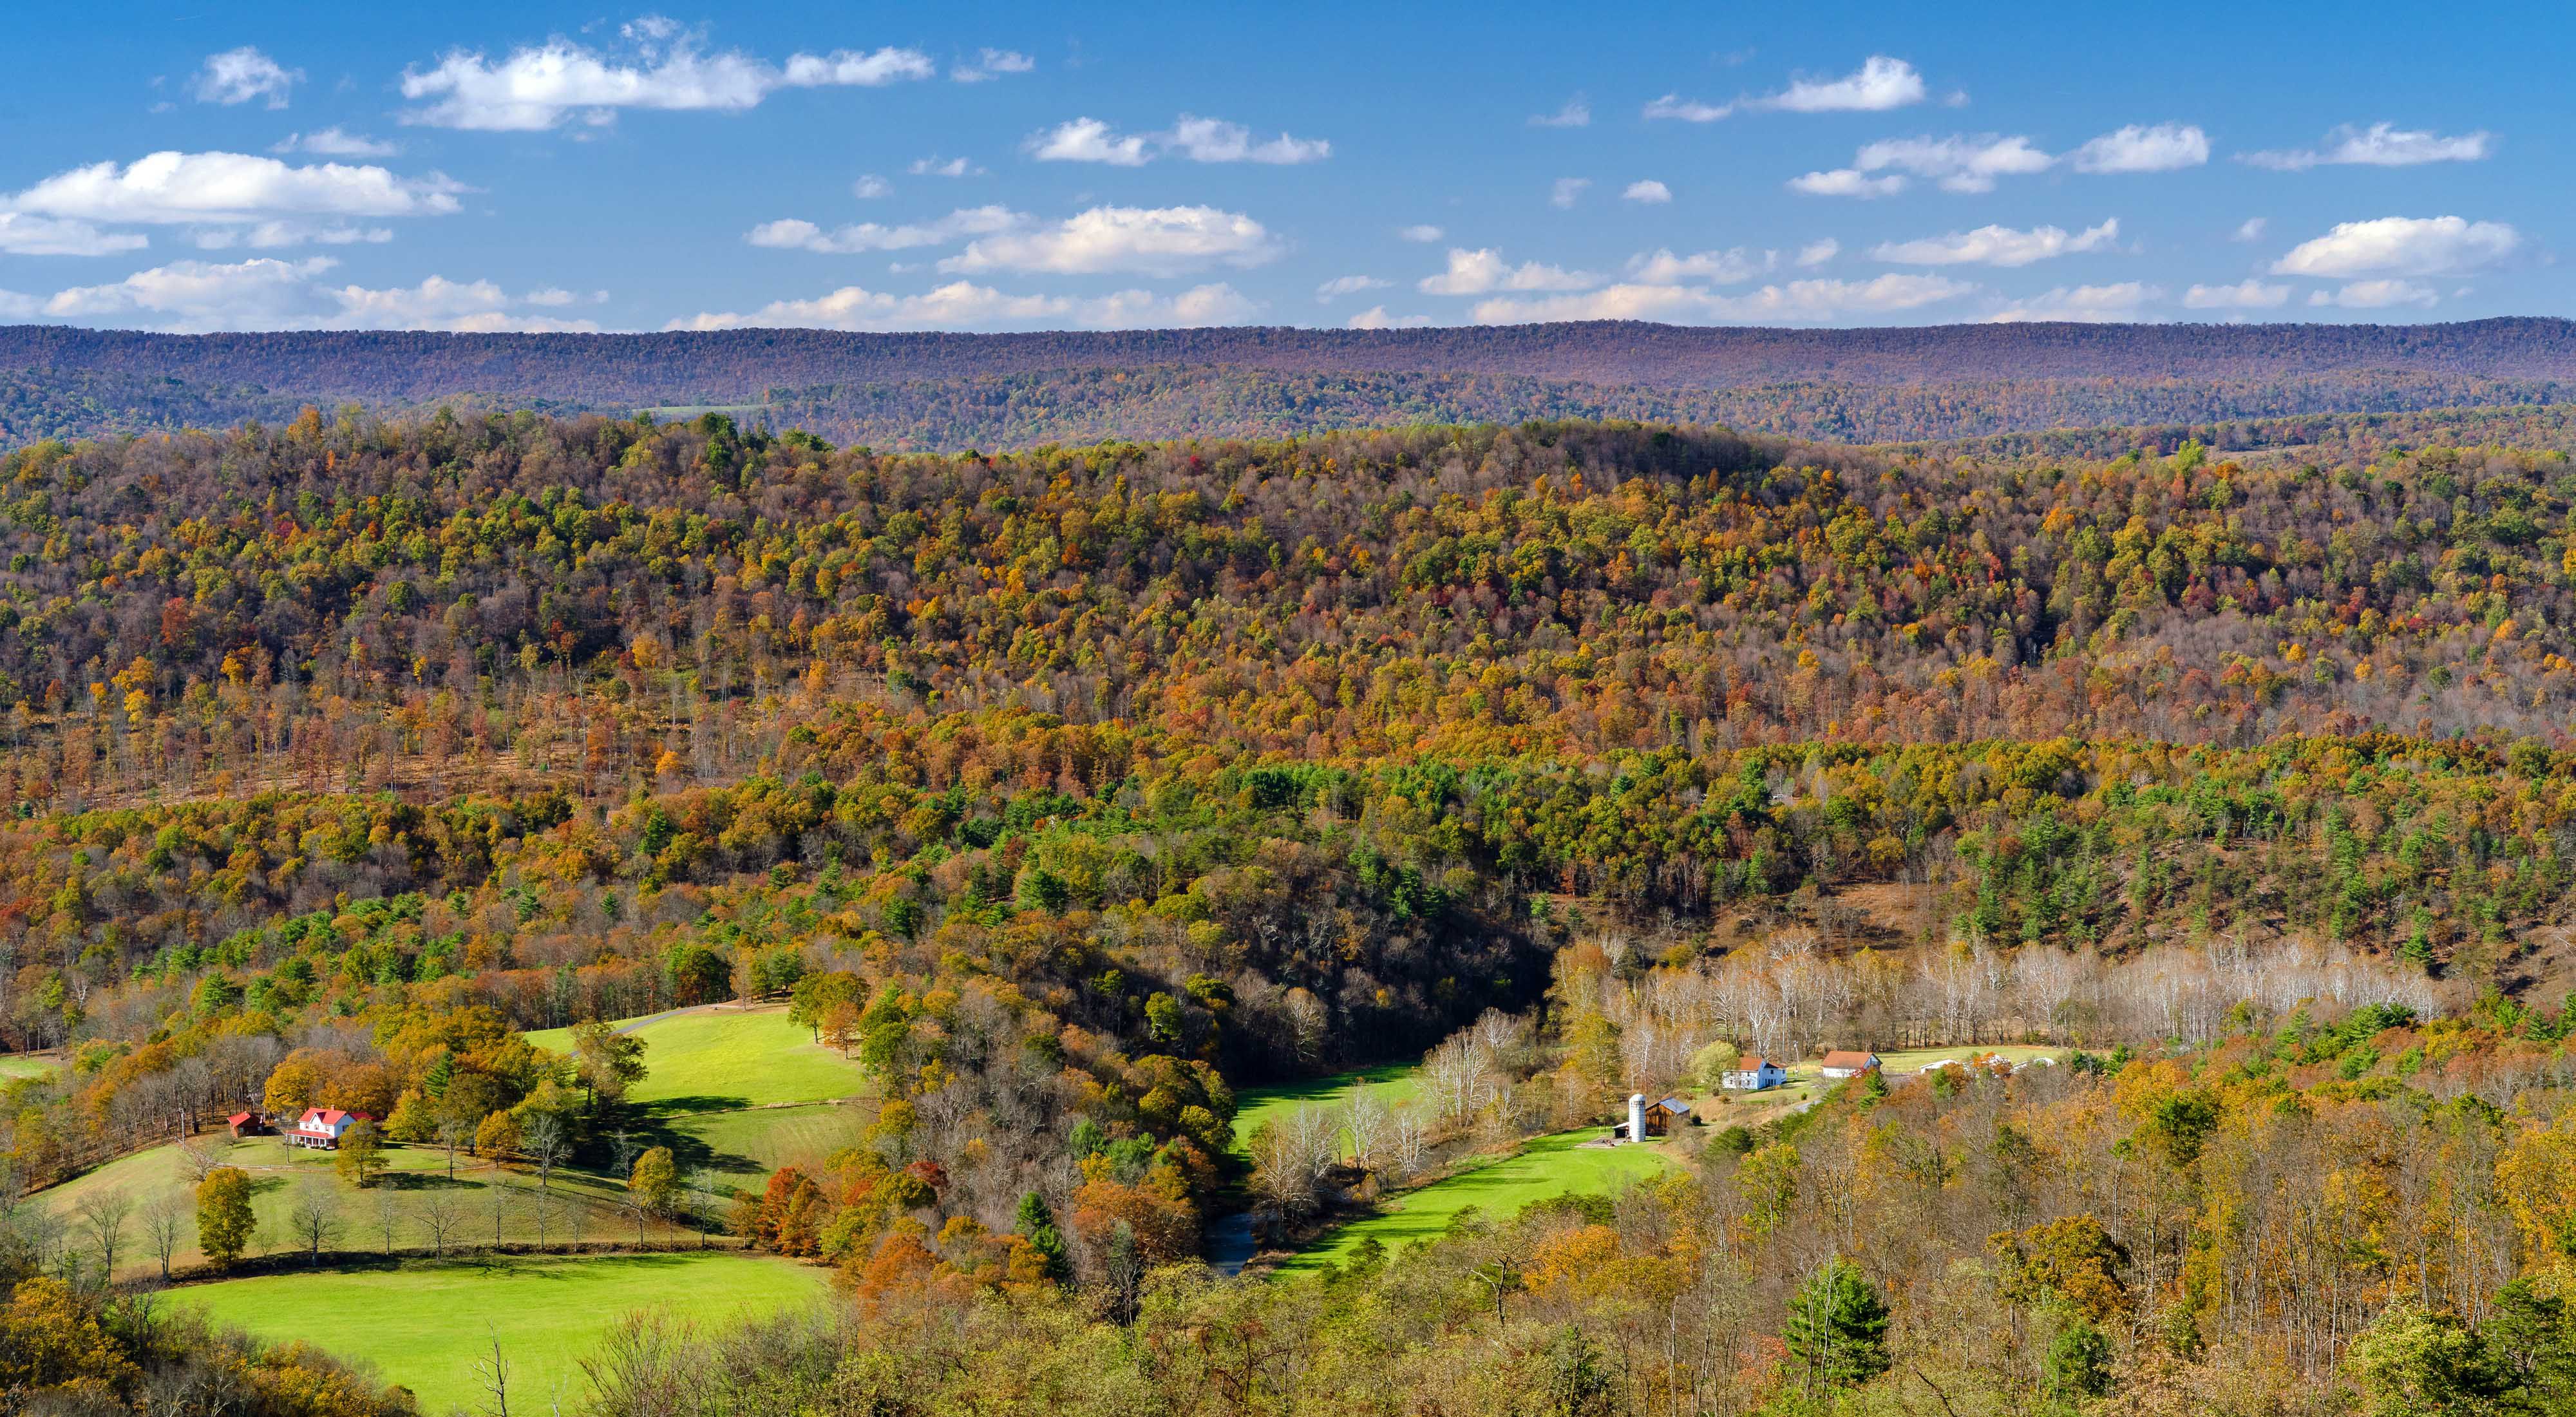 view from elevation looking over a fall deciduous landscape dotted with small farms and gentle, forested mountains in the background under a blue sky